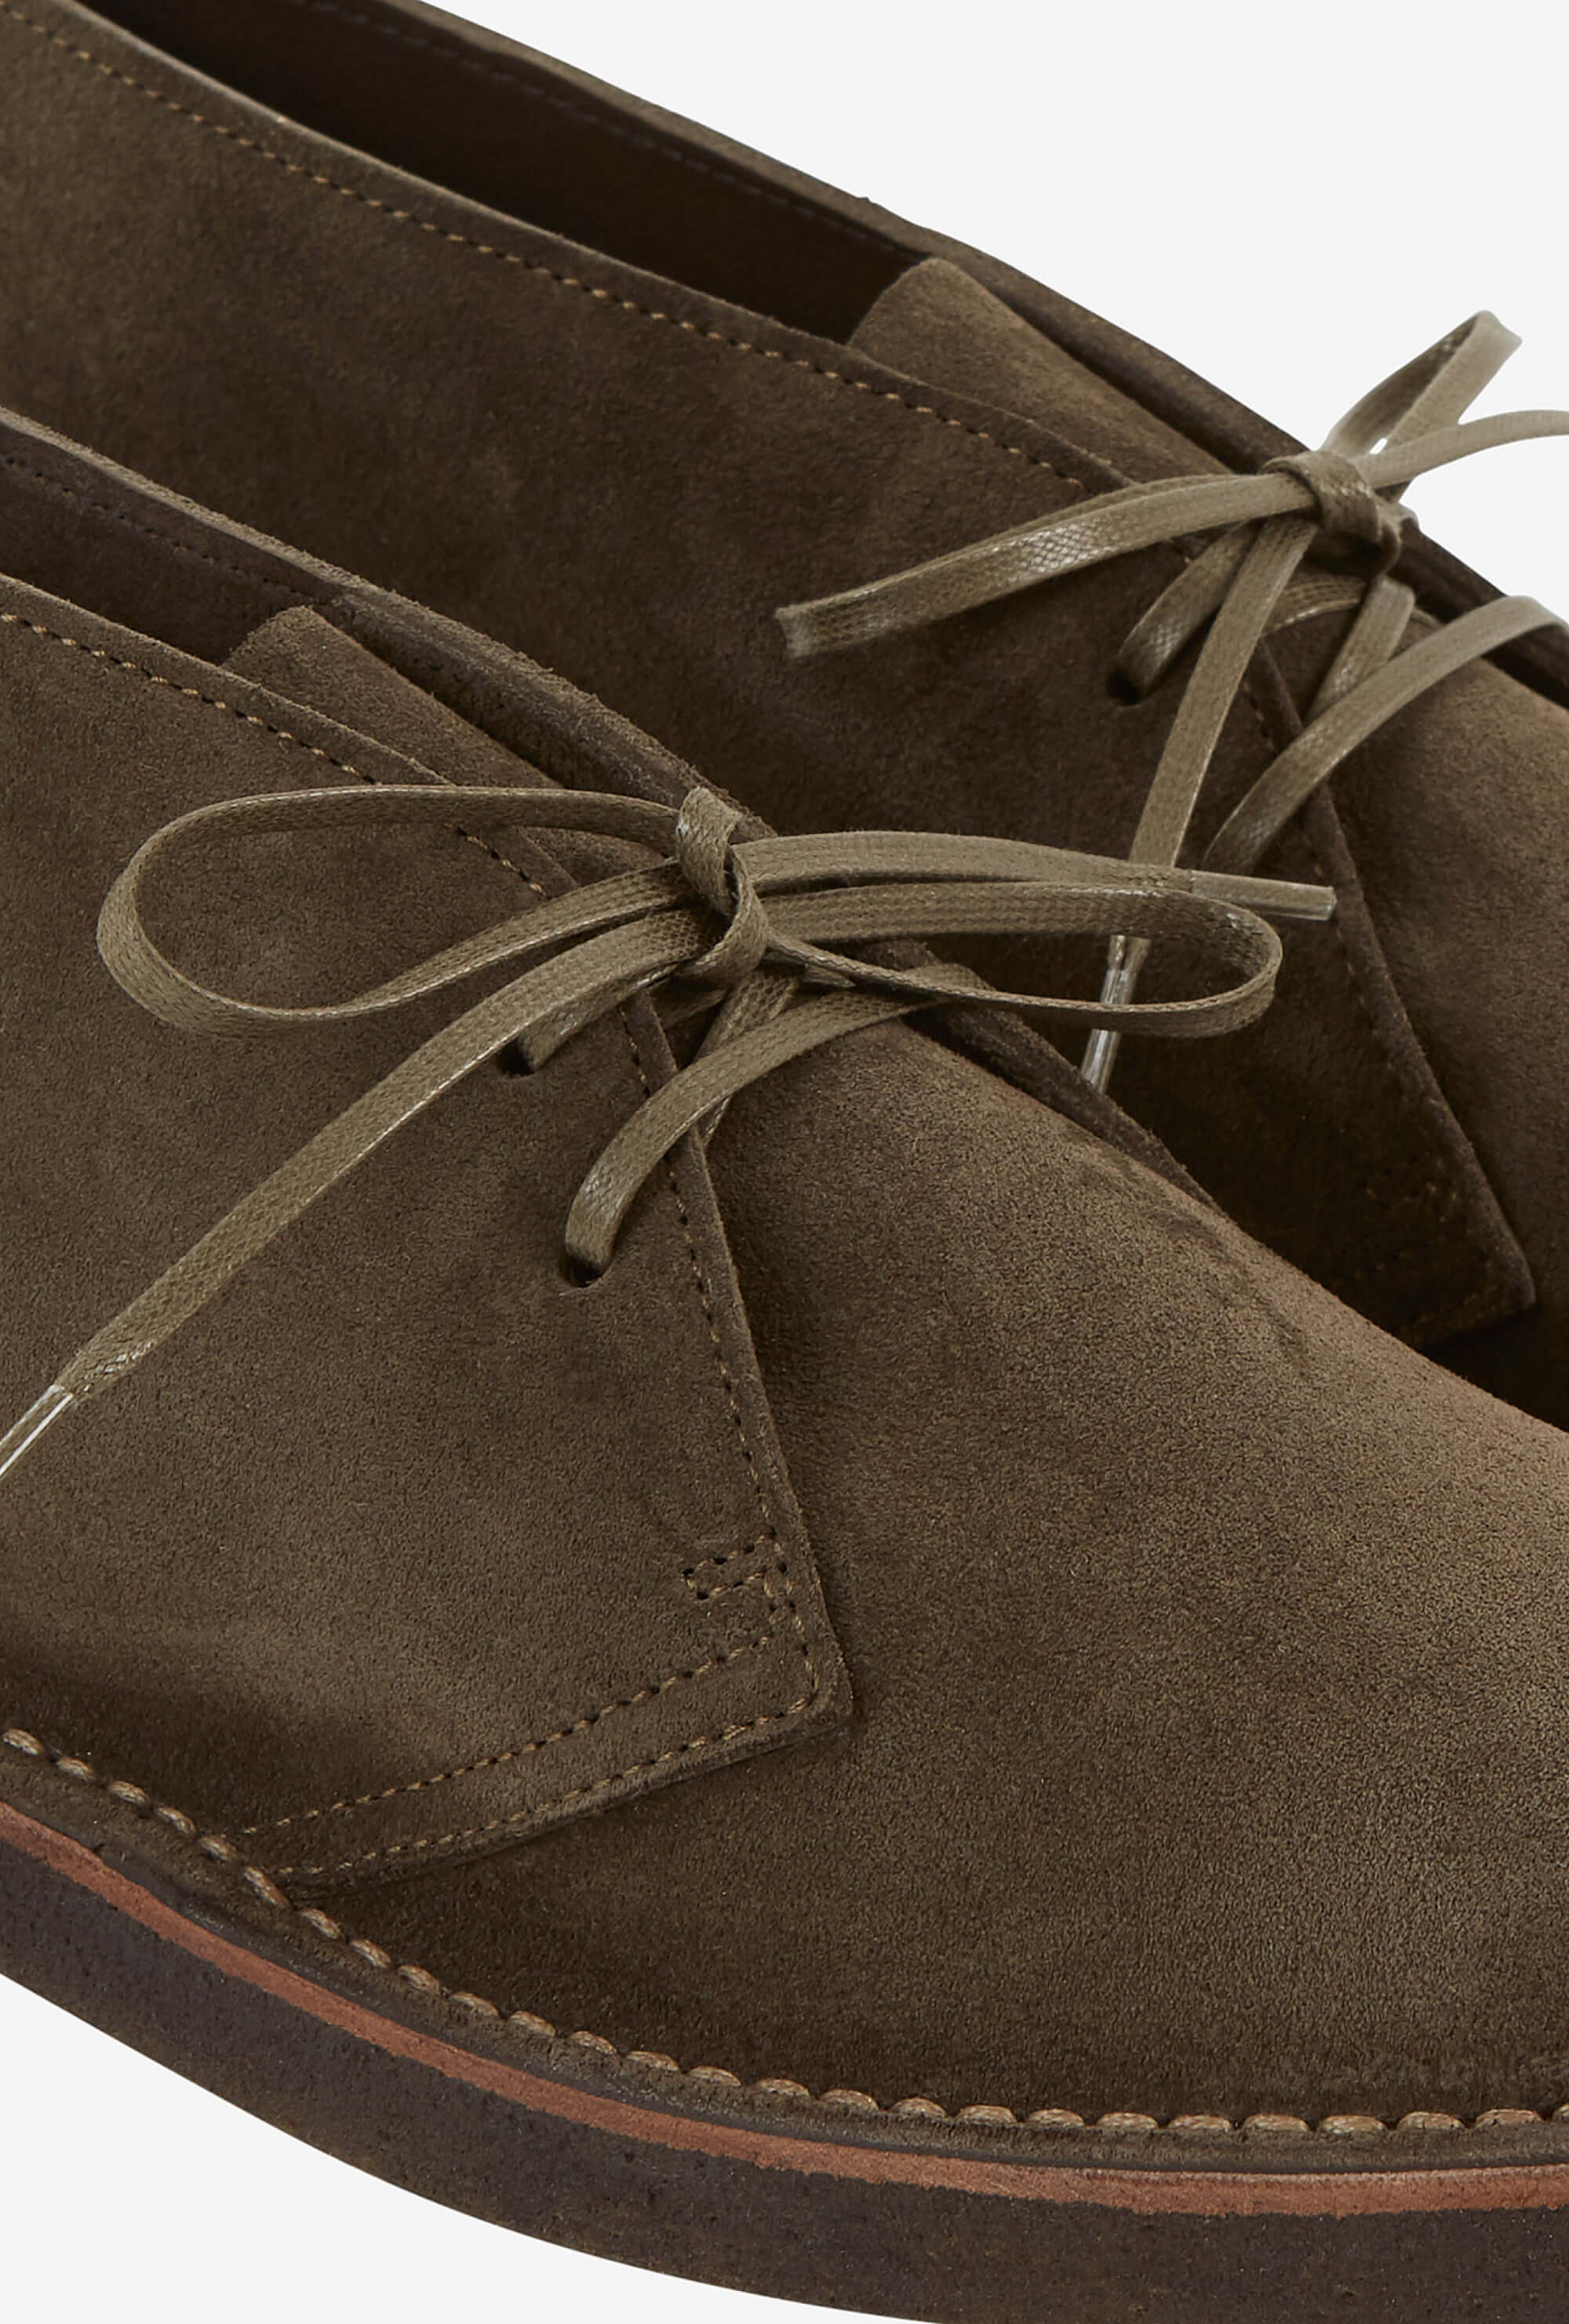 Desert Boot Crepe Sole Forest Suede